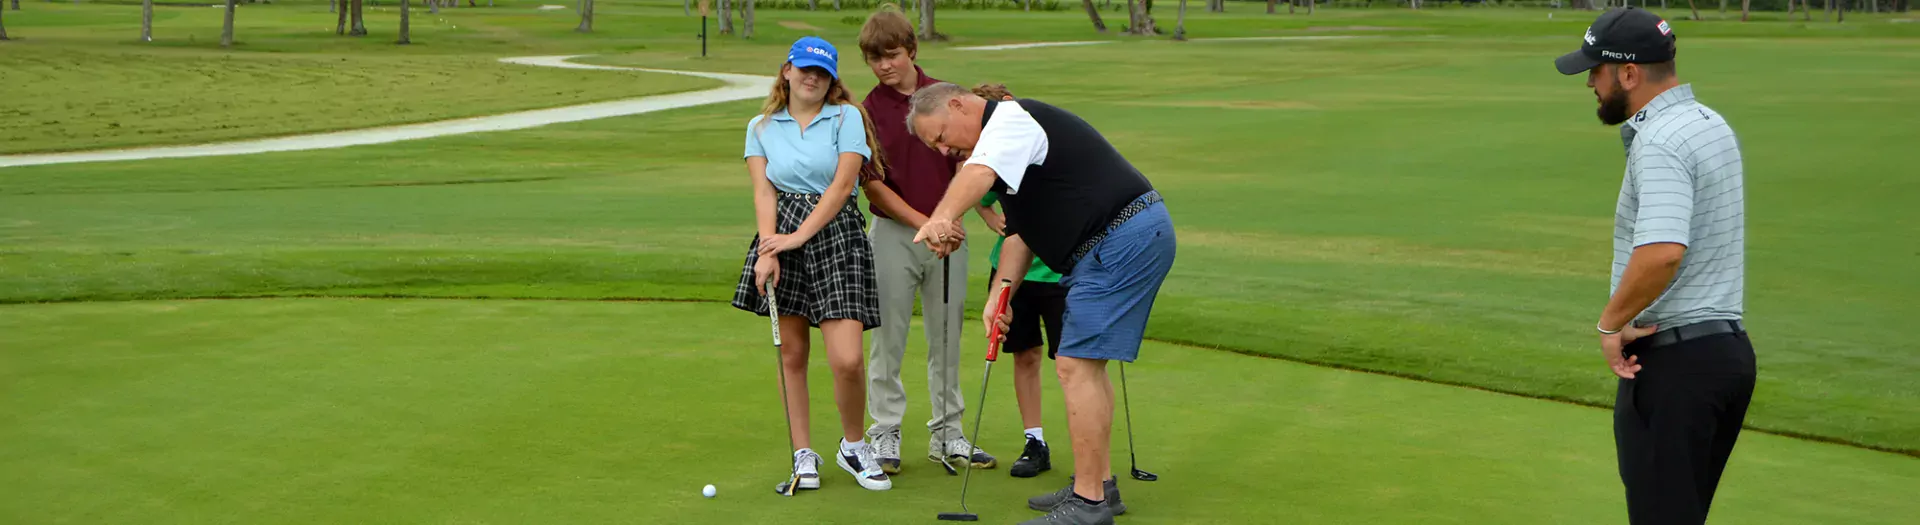 Instructors showing kids how to play golf